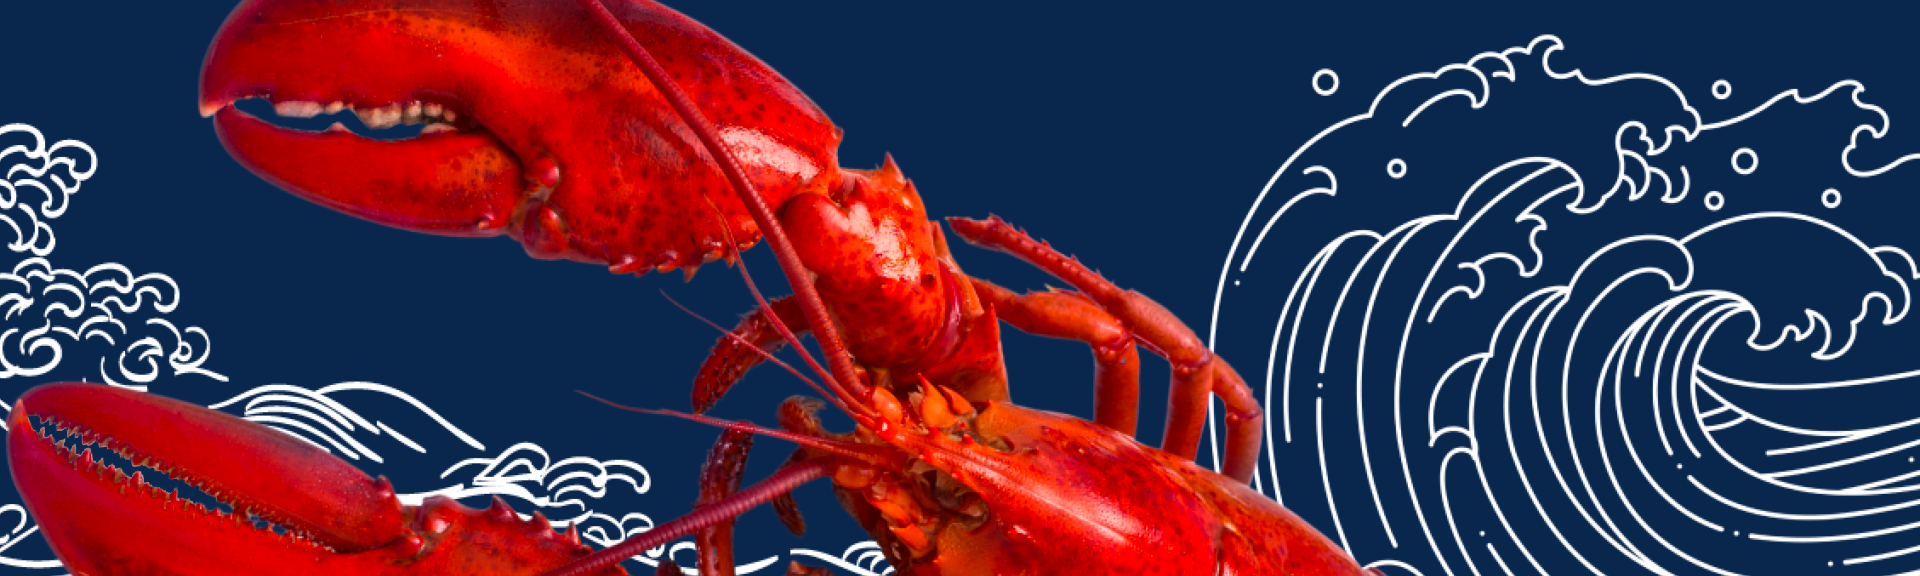 Why Make it Maine? The Lobster Industry 101 recipe image